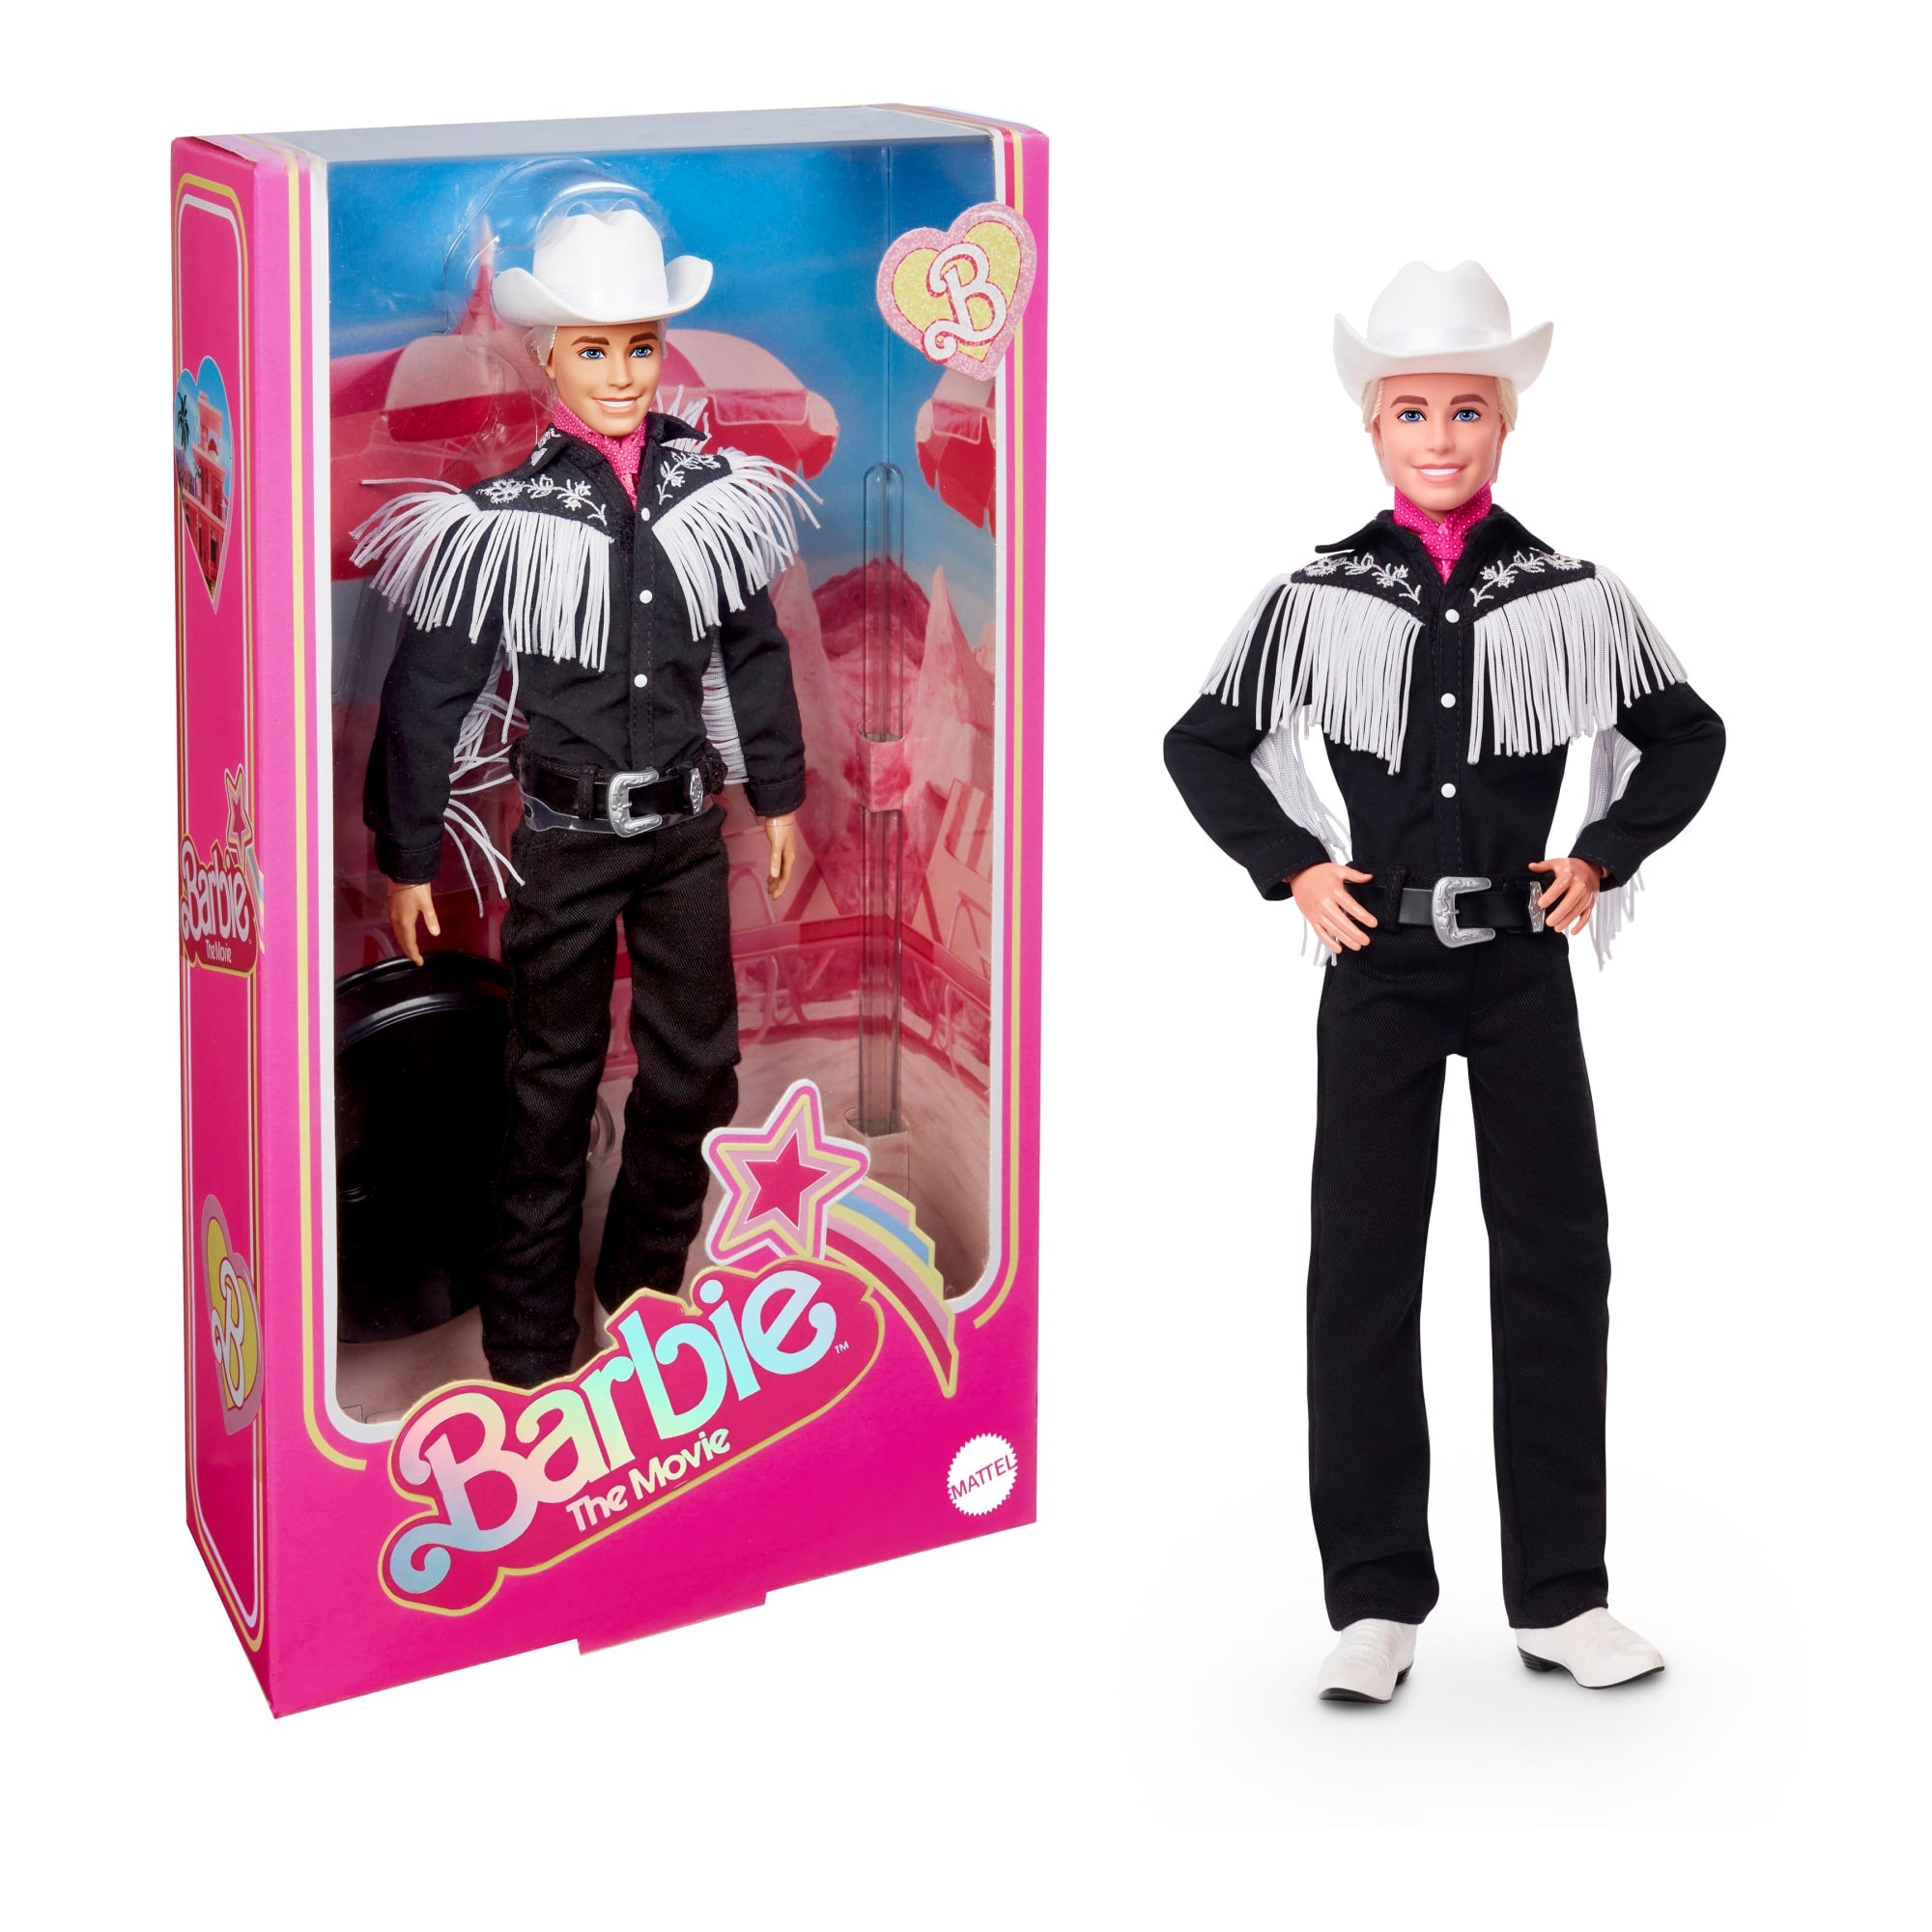 Barbie Doll and Ken Doll Box Costume Set